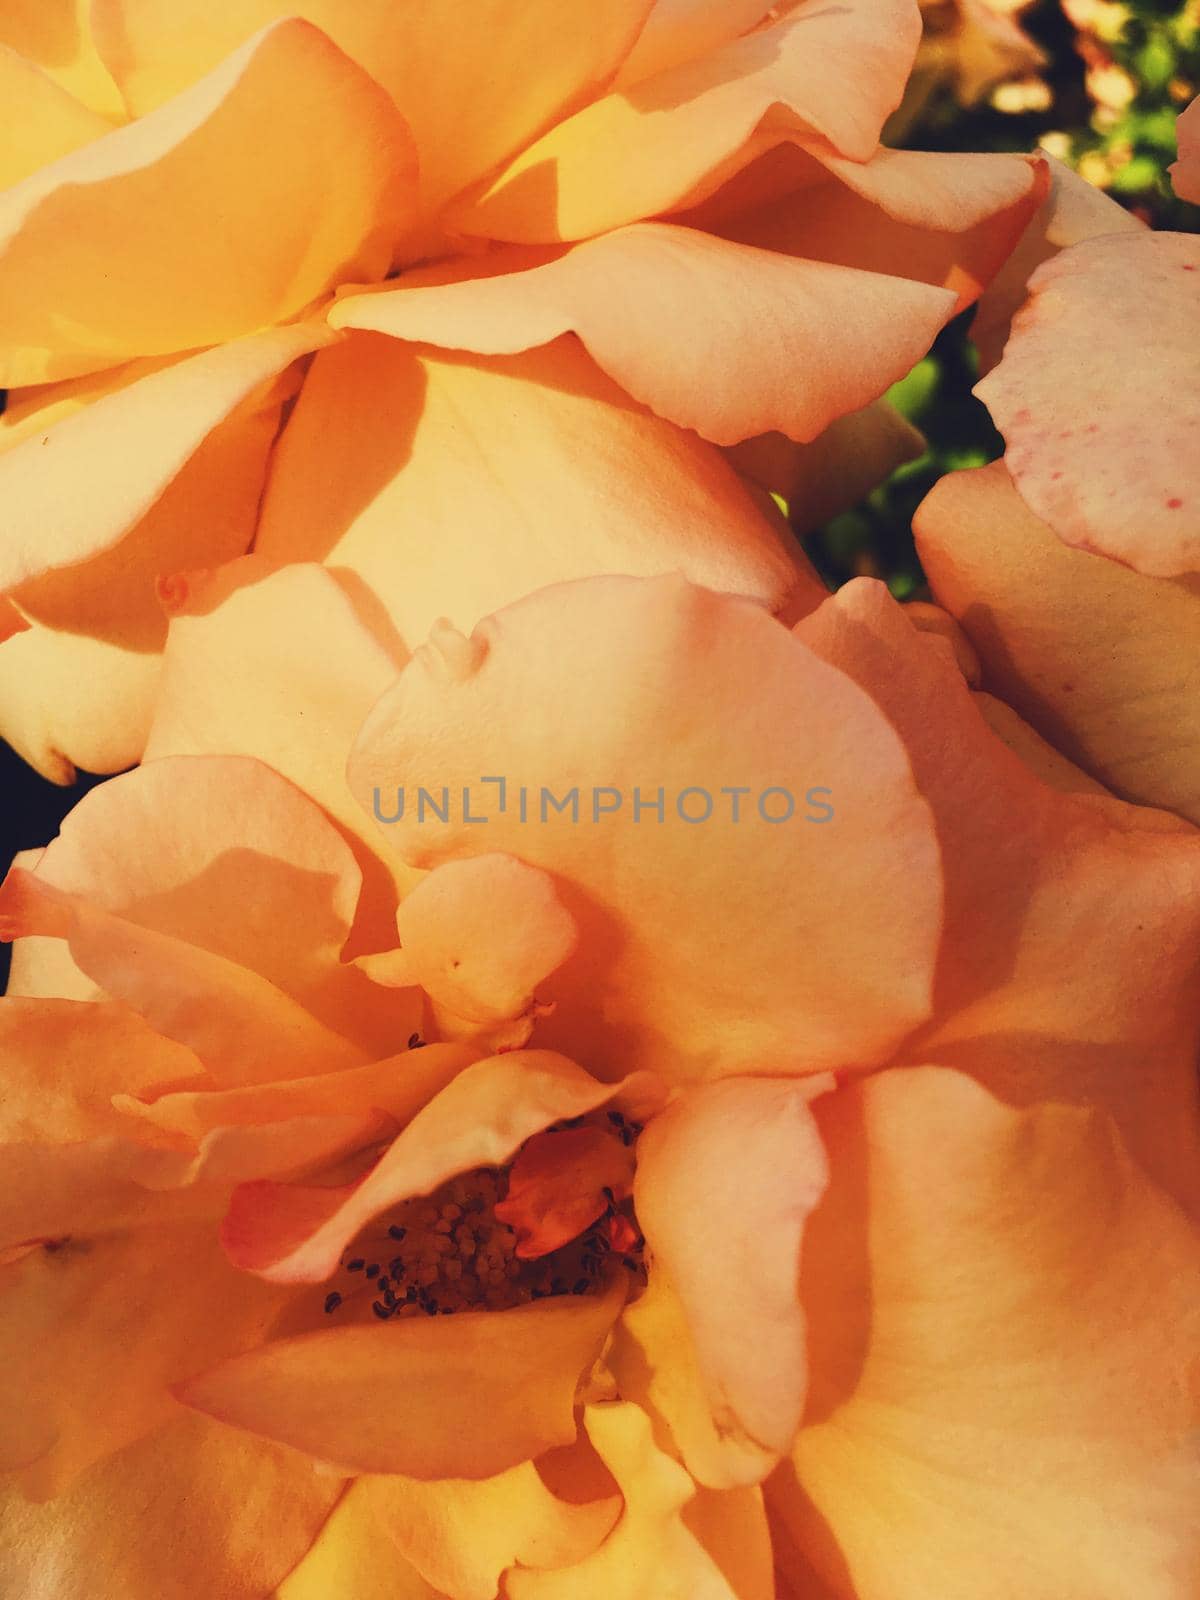 Wonderful blooming rose flower at sunset, floral beauty background by Anneleven